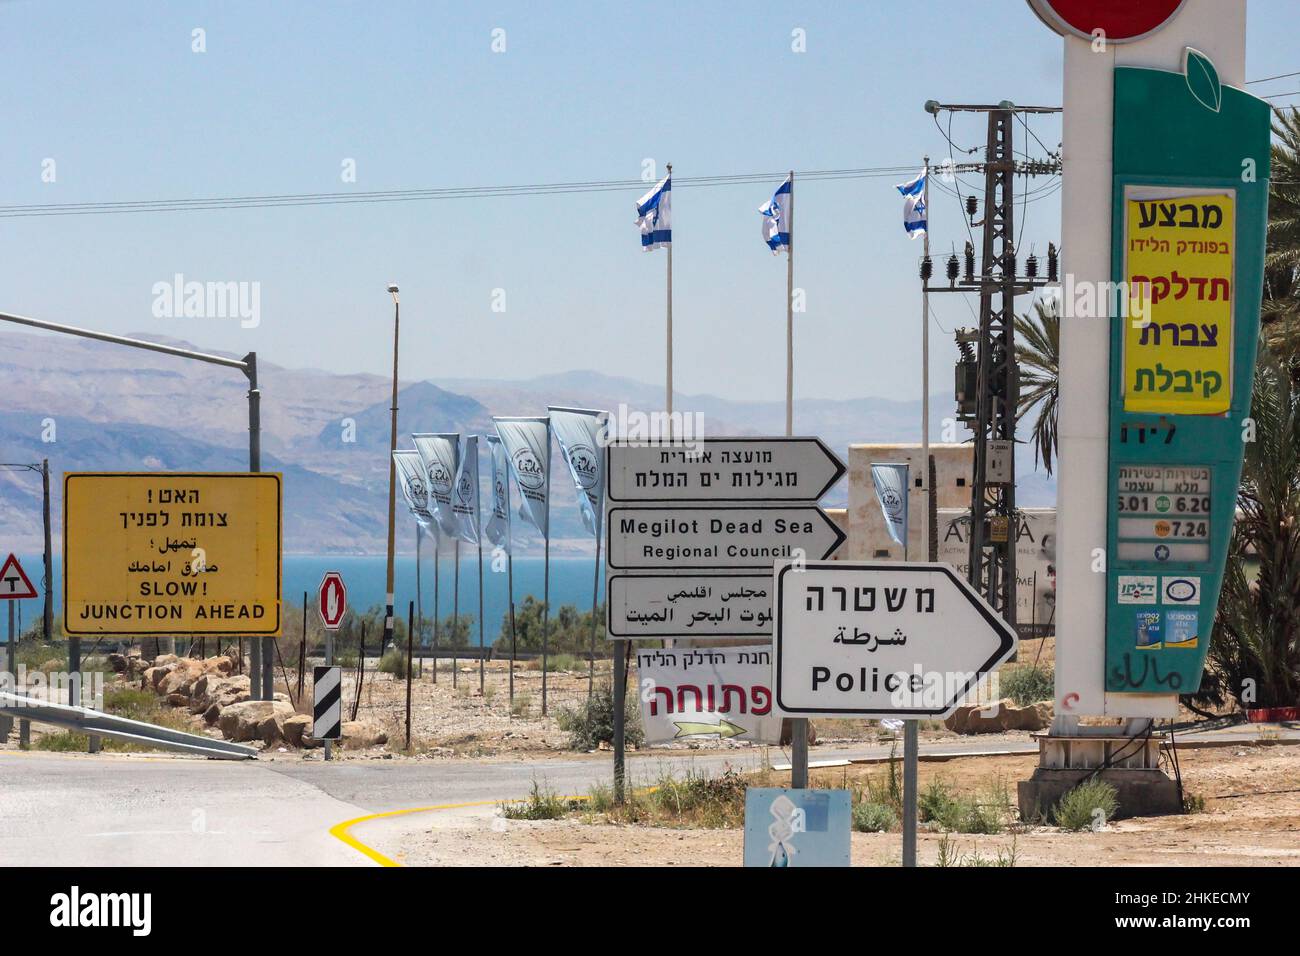 Israeli flags fly beyond trilingual signs written in Hebrew, Arabic and English directing travelers to various destinations near the Dead Sea. Stock Photo